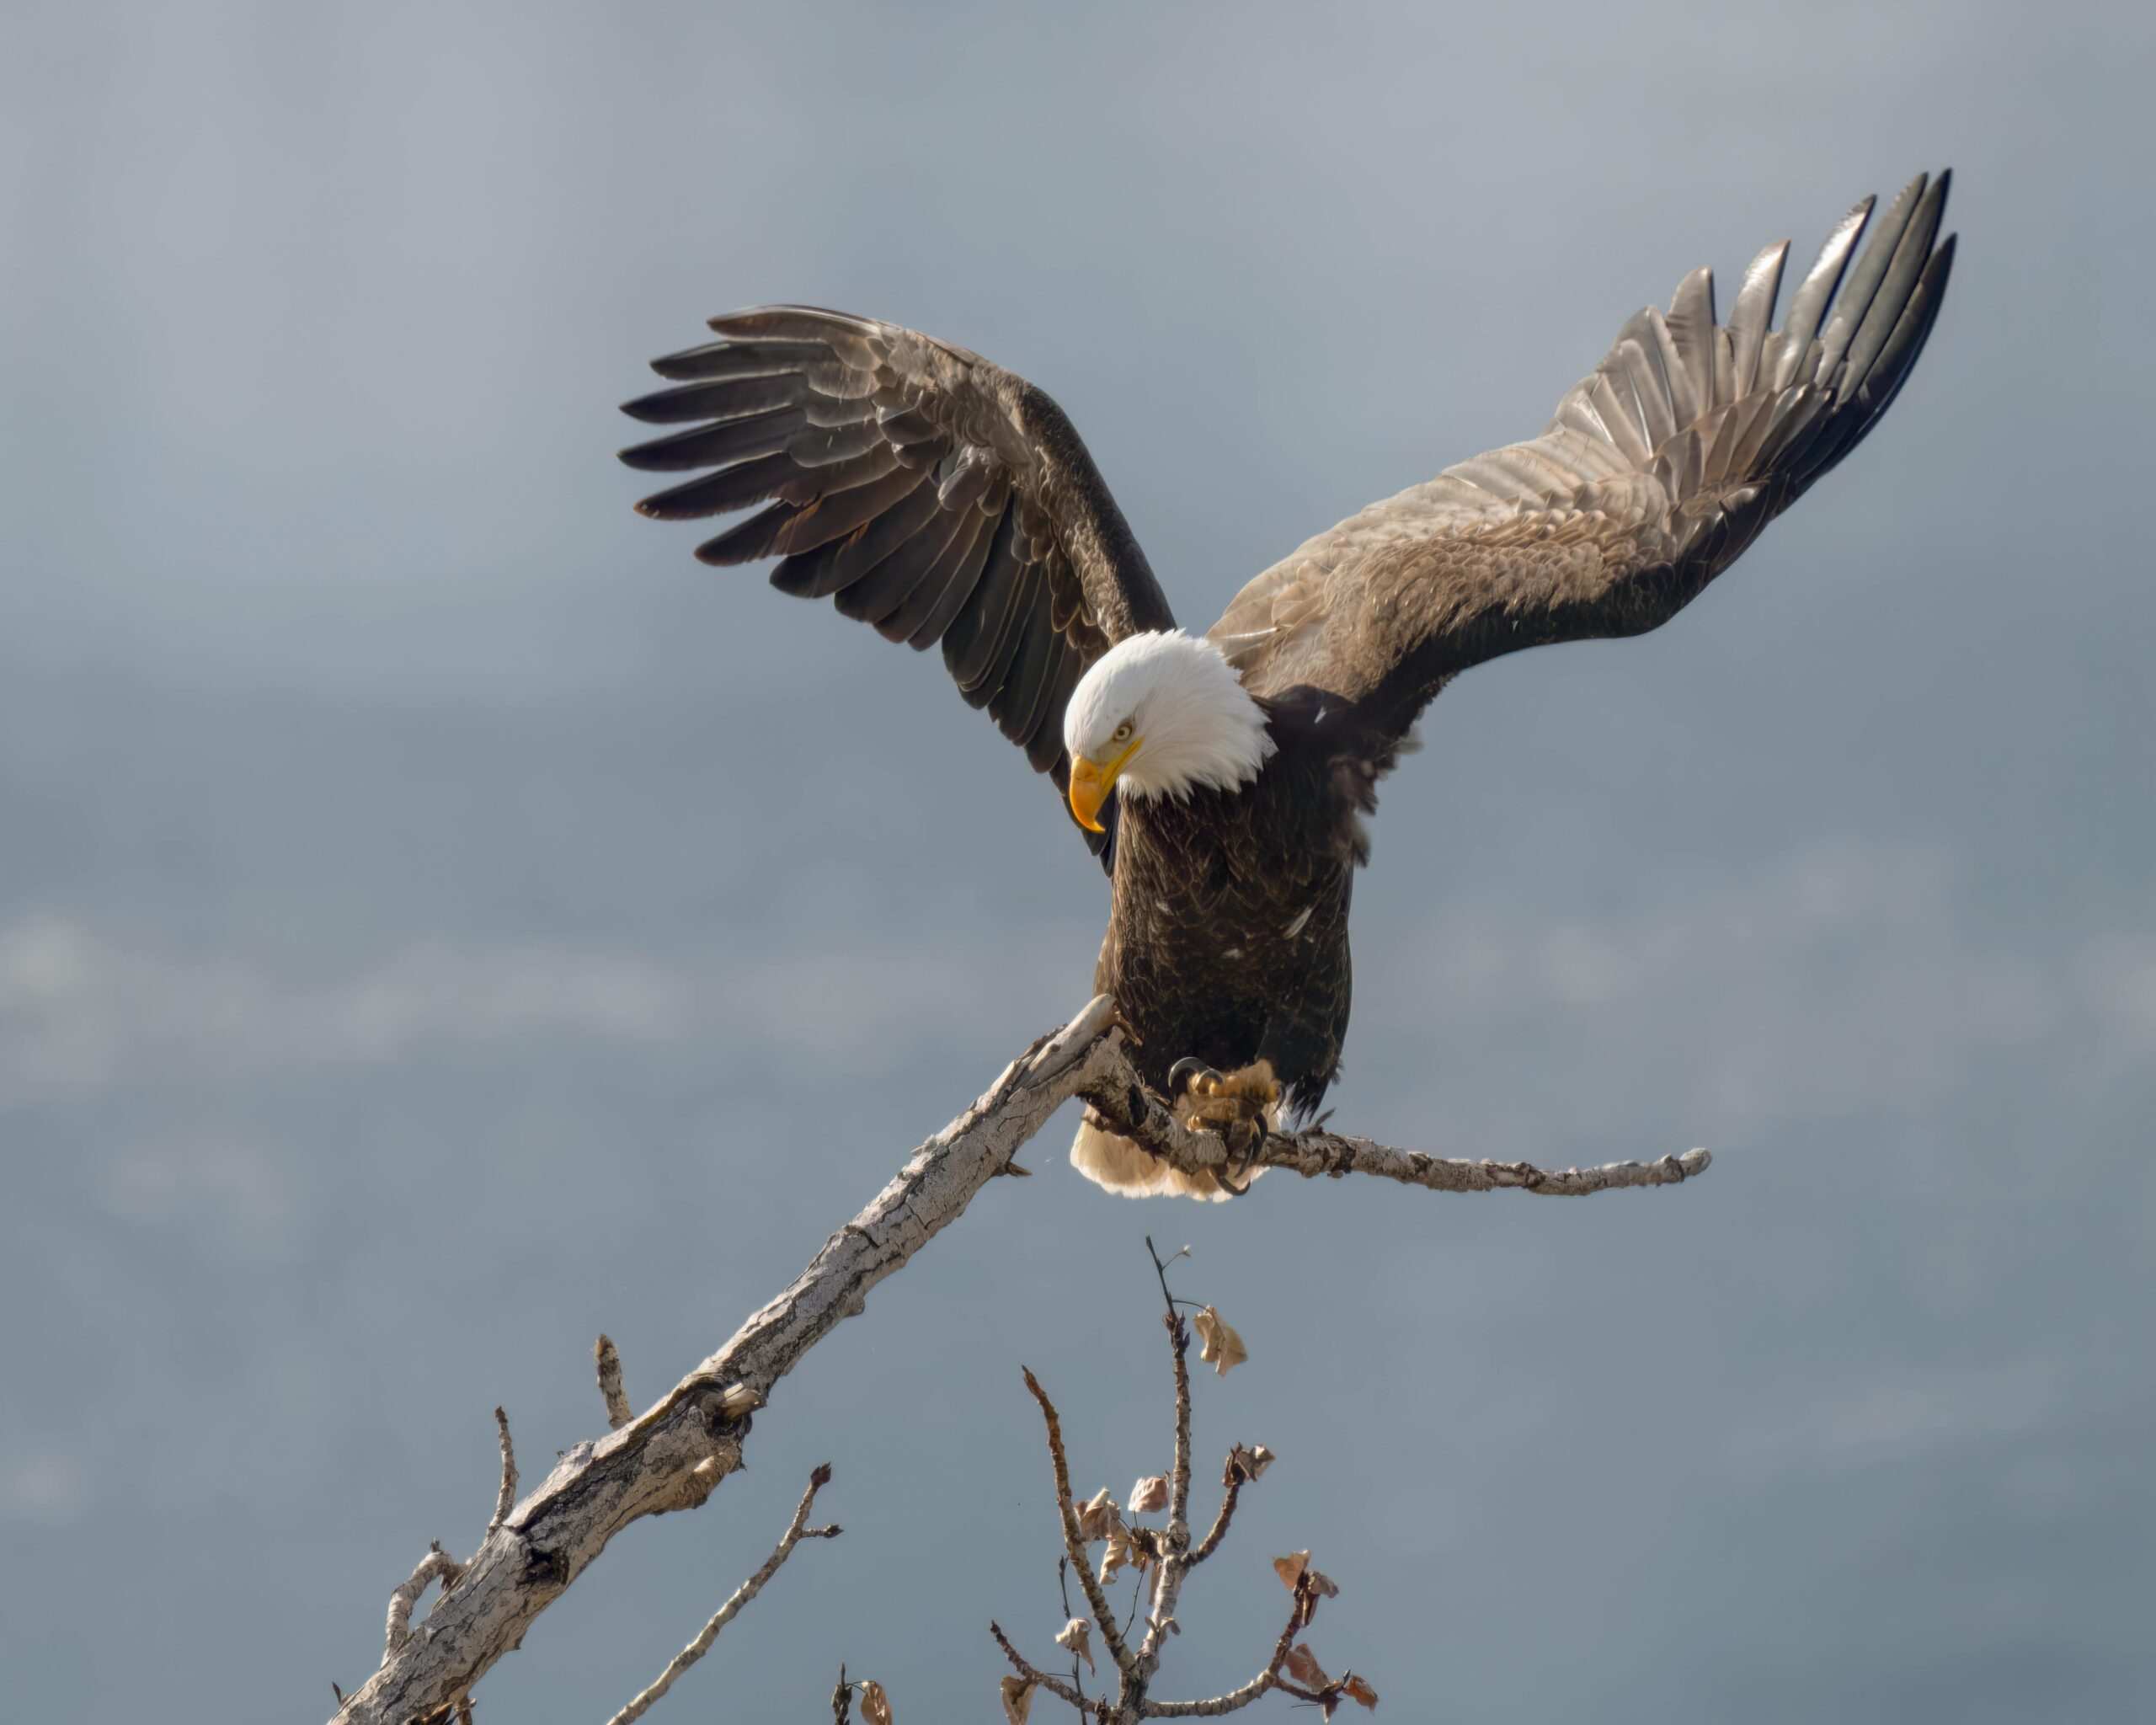 are there bald eagles in Adirondacks